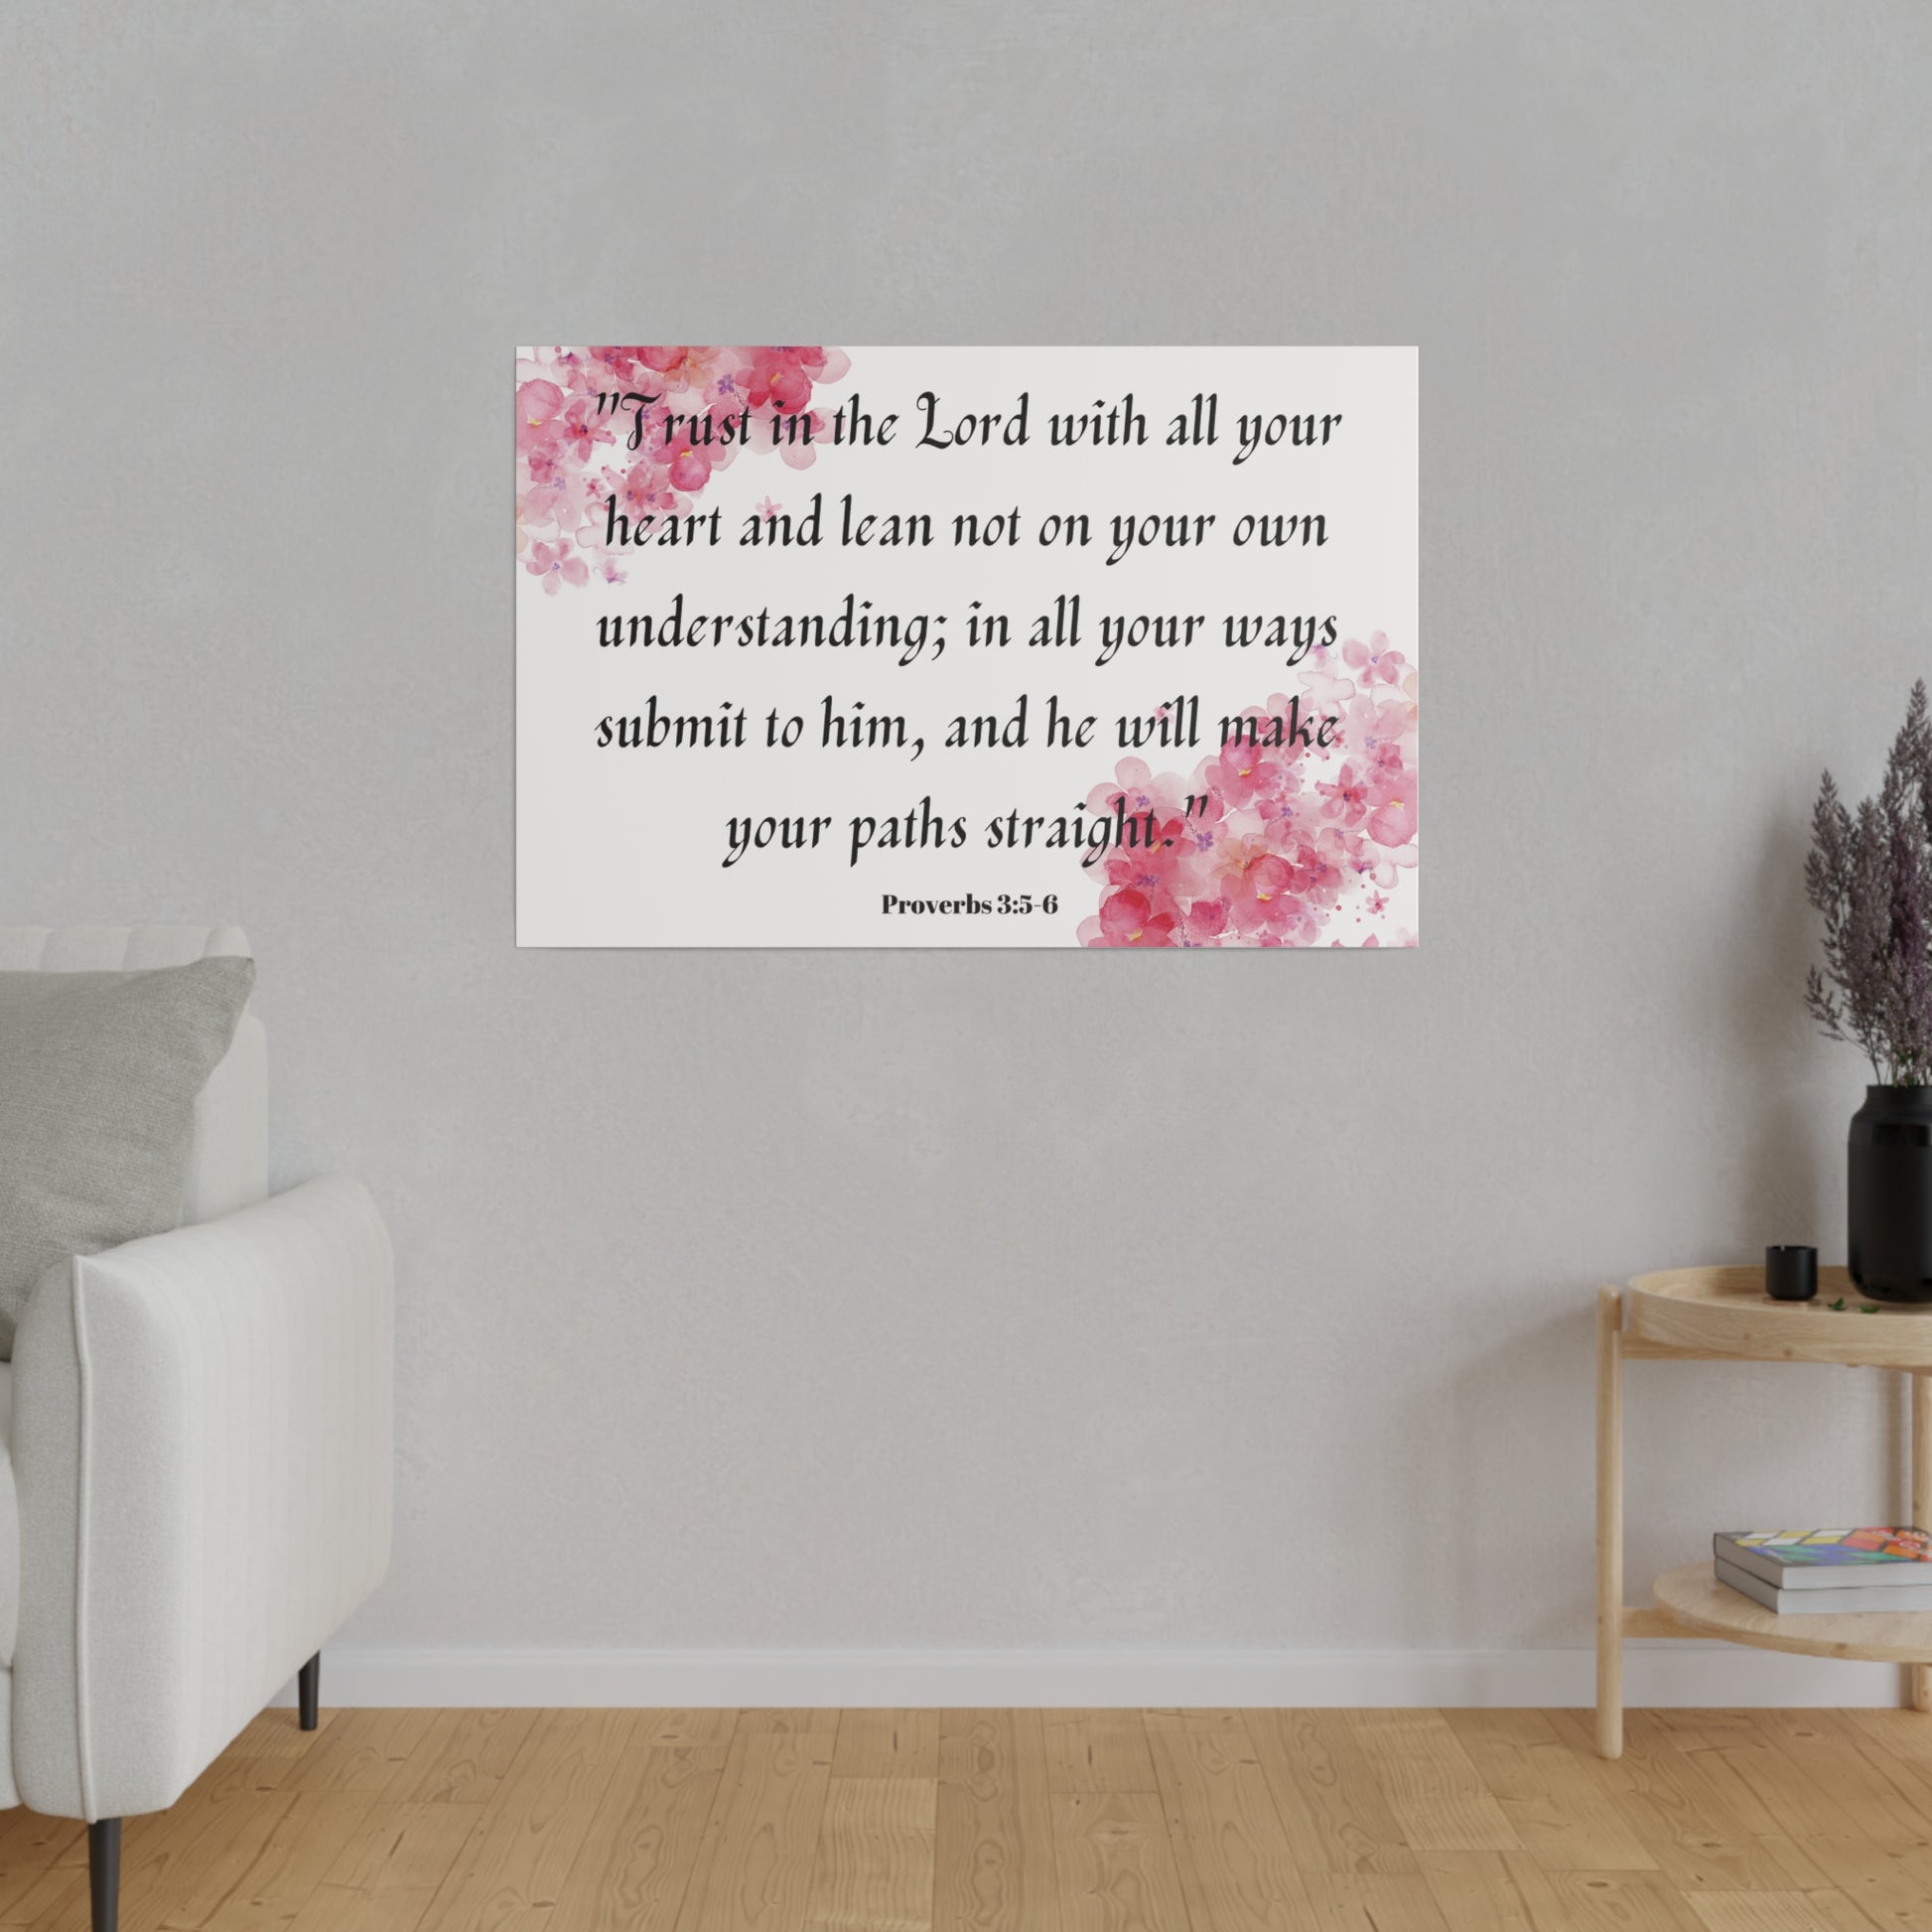 Abstract Canvas Wall Art: Eco-Friendly, Vibrant Prints with Scripture Verse | Art & Wall Decor,Canvas,Decor,Eco-friendly,Hanging Hardware,Holiday Picks,Home & Living,Indoor,Matte,Seasonal Picks,Sustainable,Wall,Wood